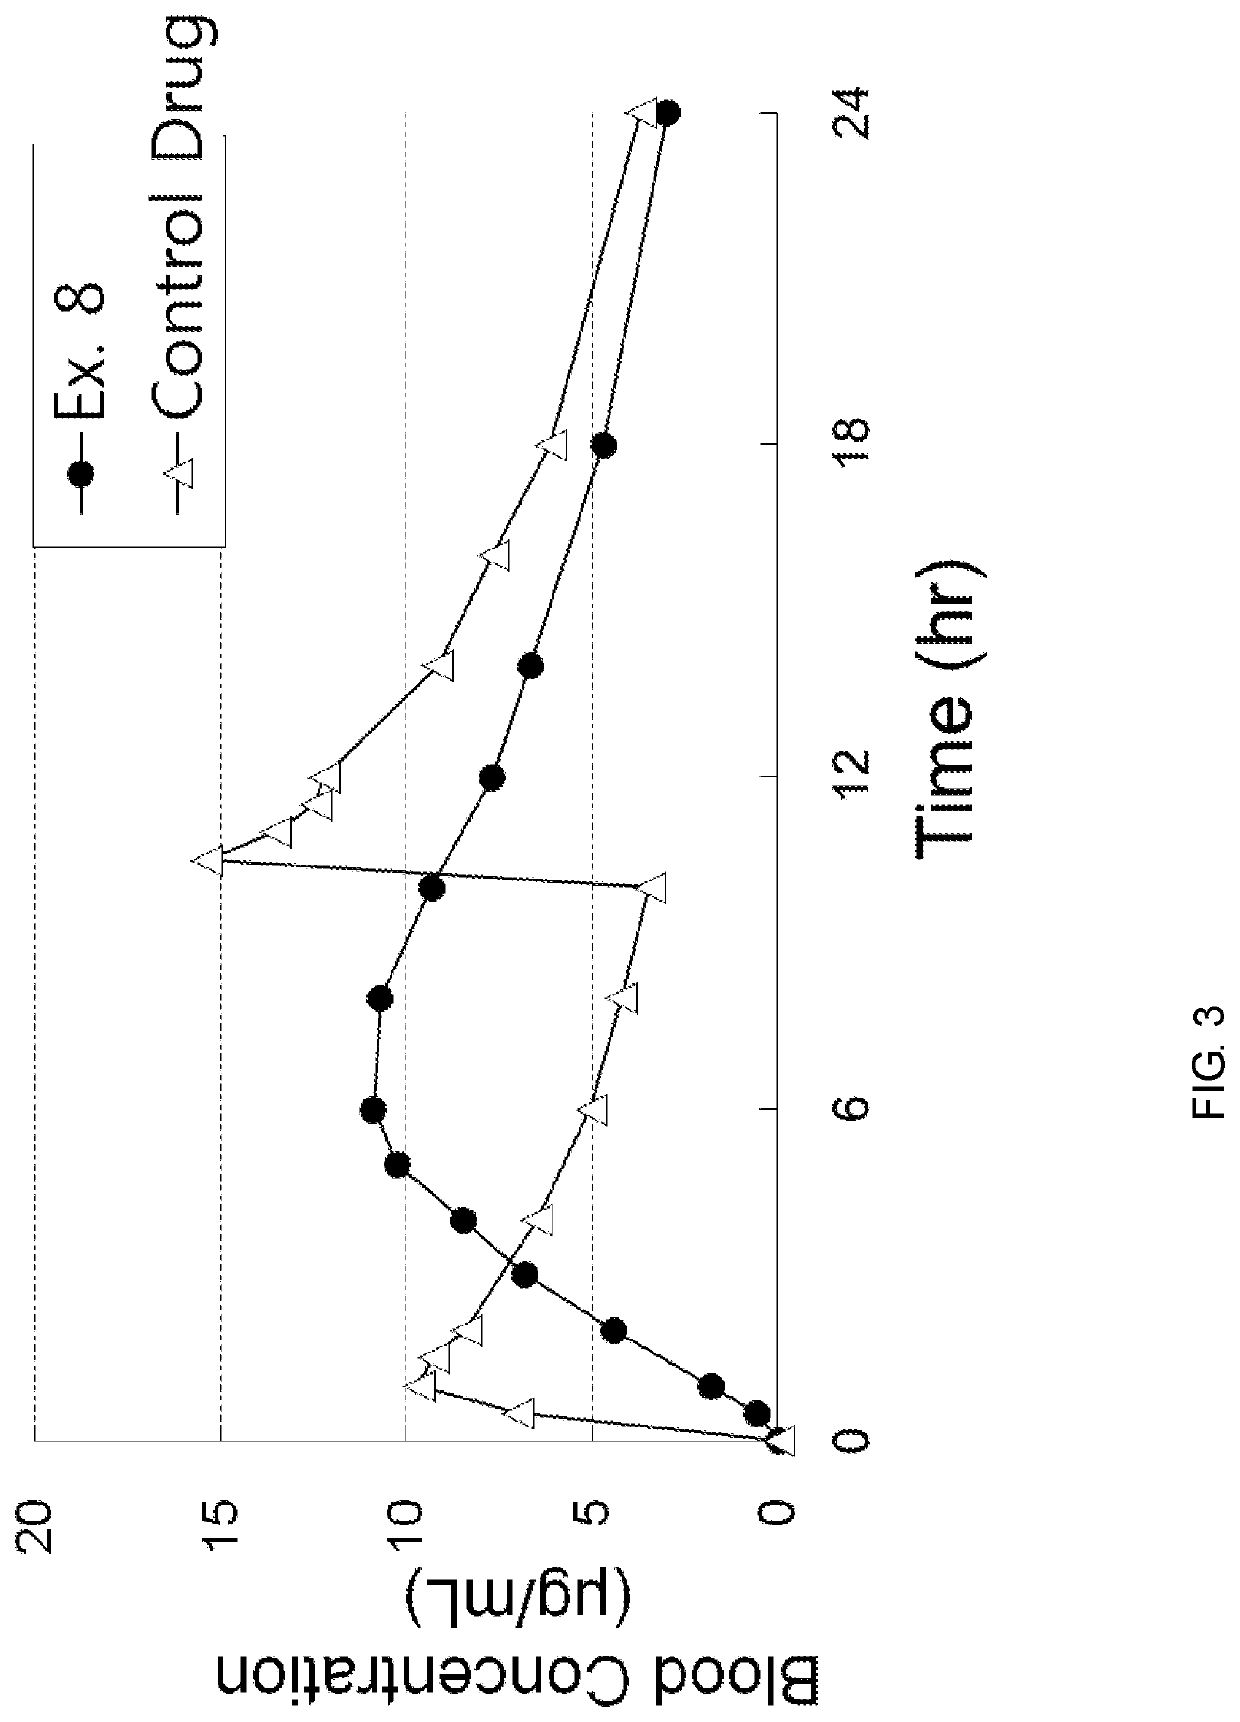 Pregabalin-containing, high swellable, sustained-release triple layer tablet